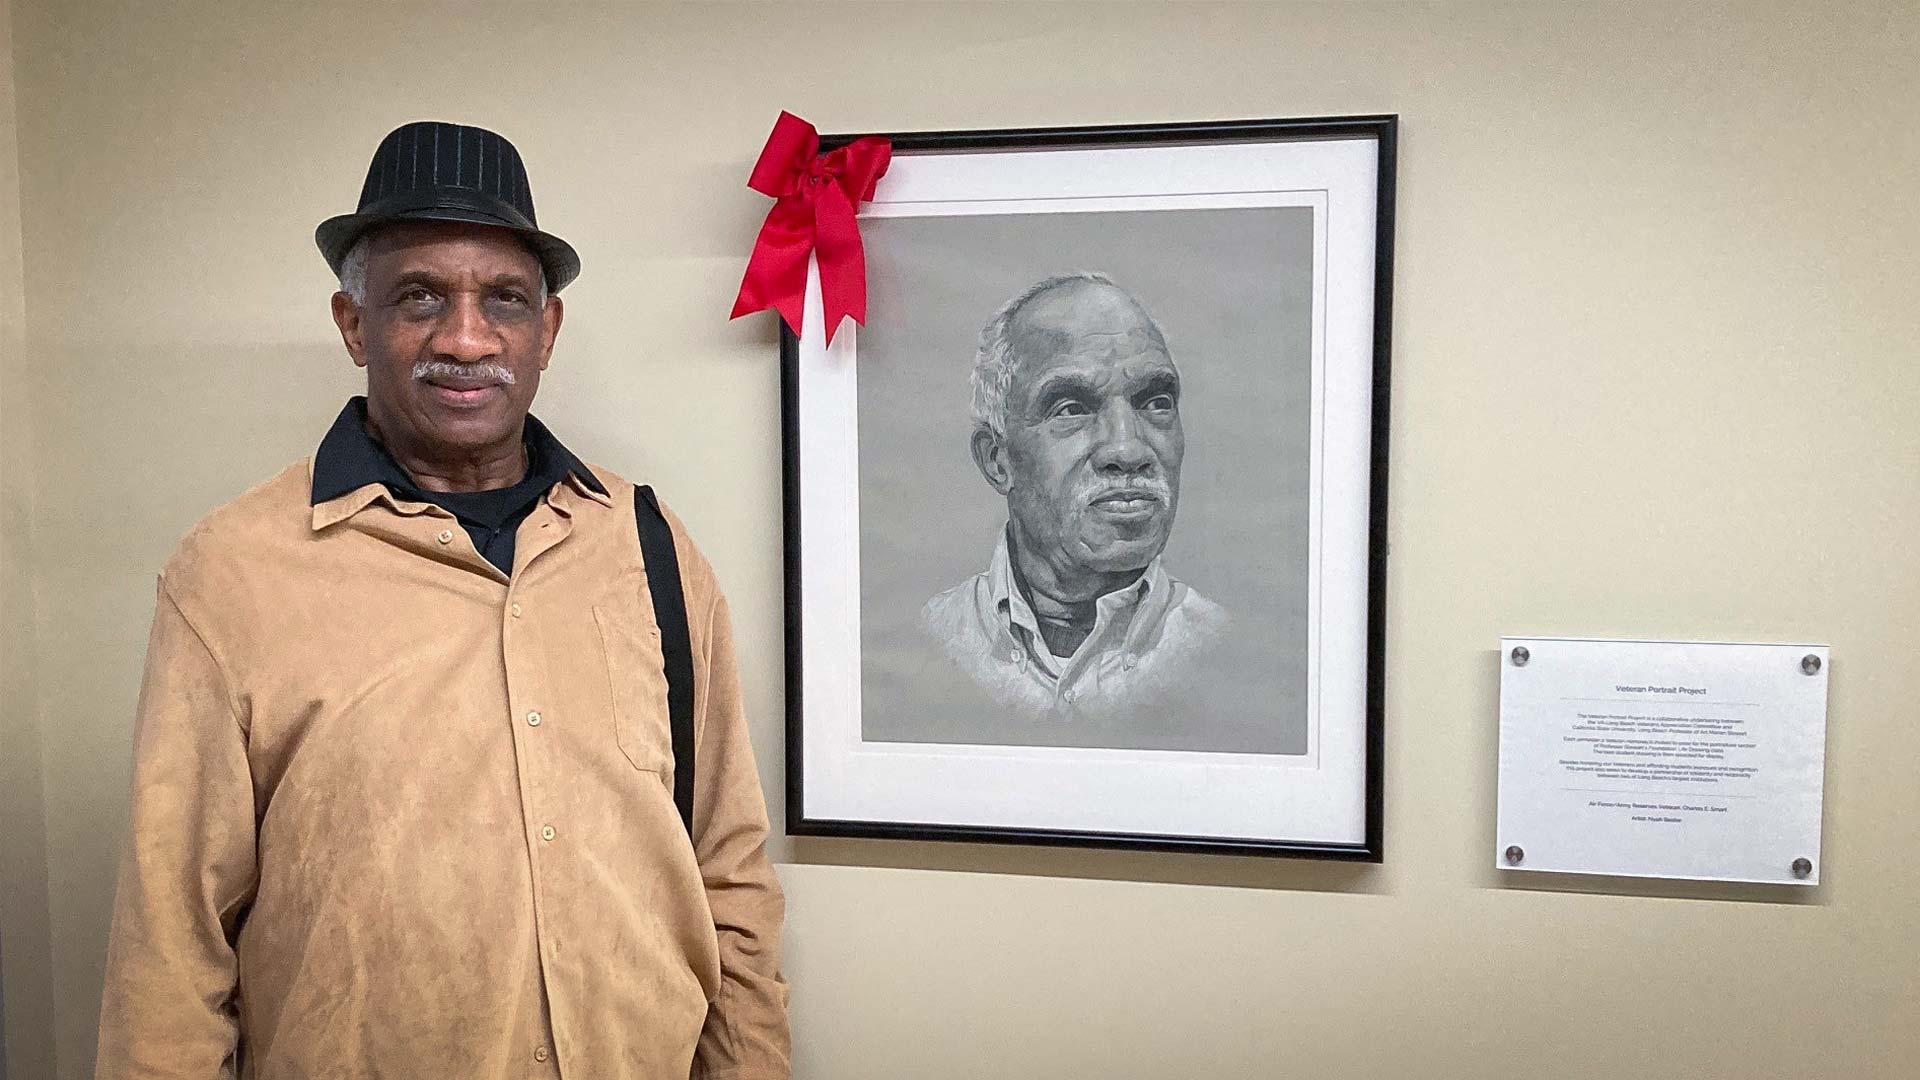 Veteran Charles Smart stands by portrait